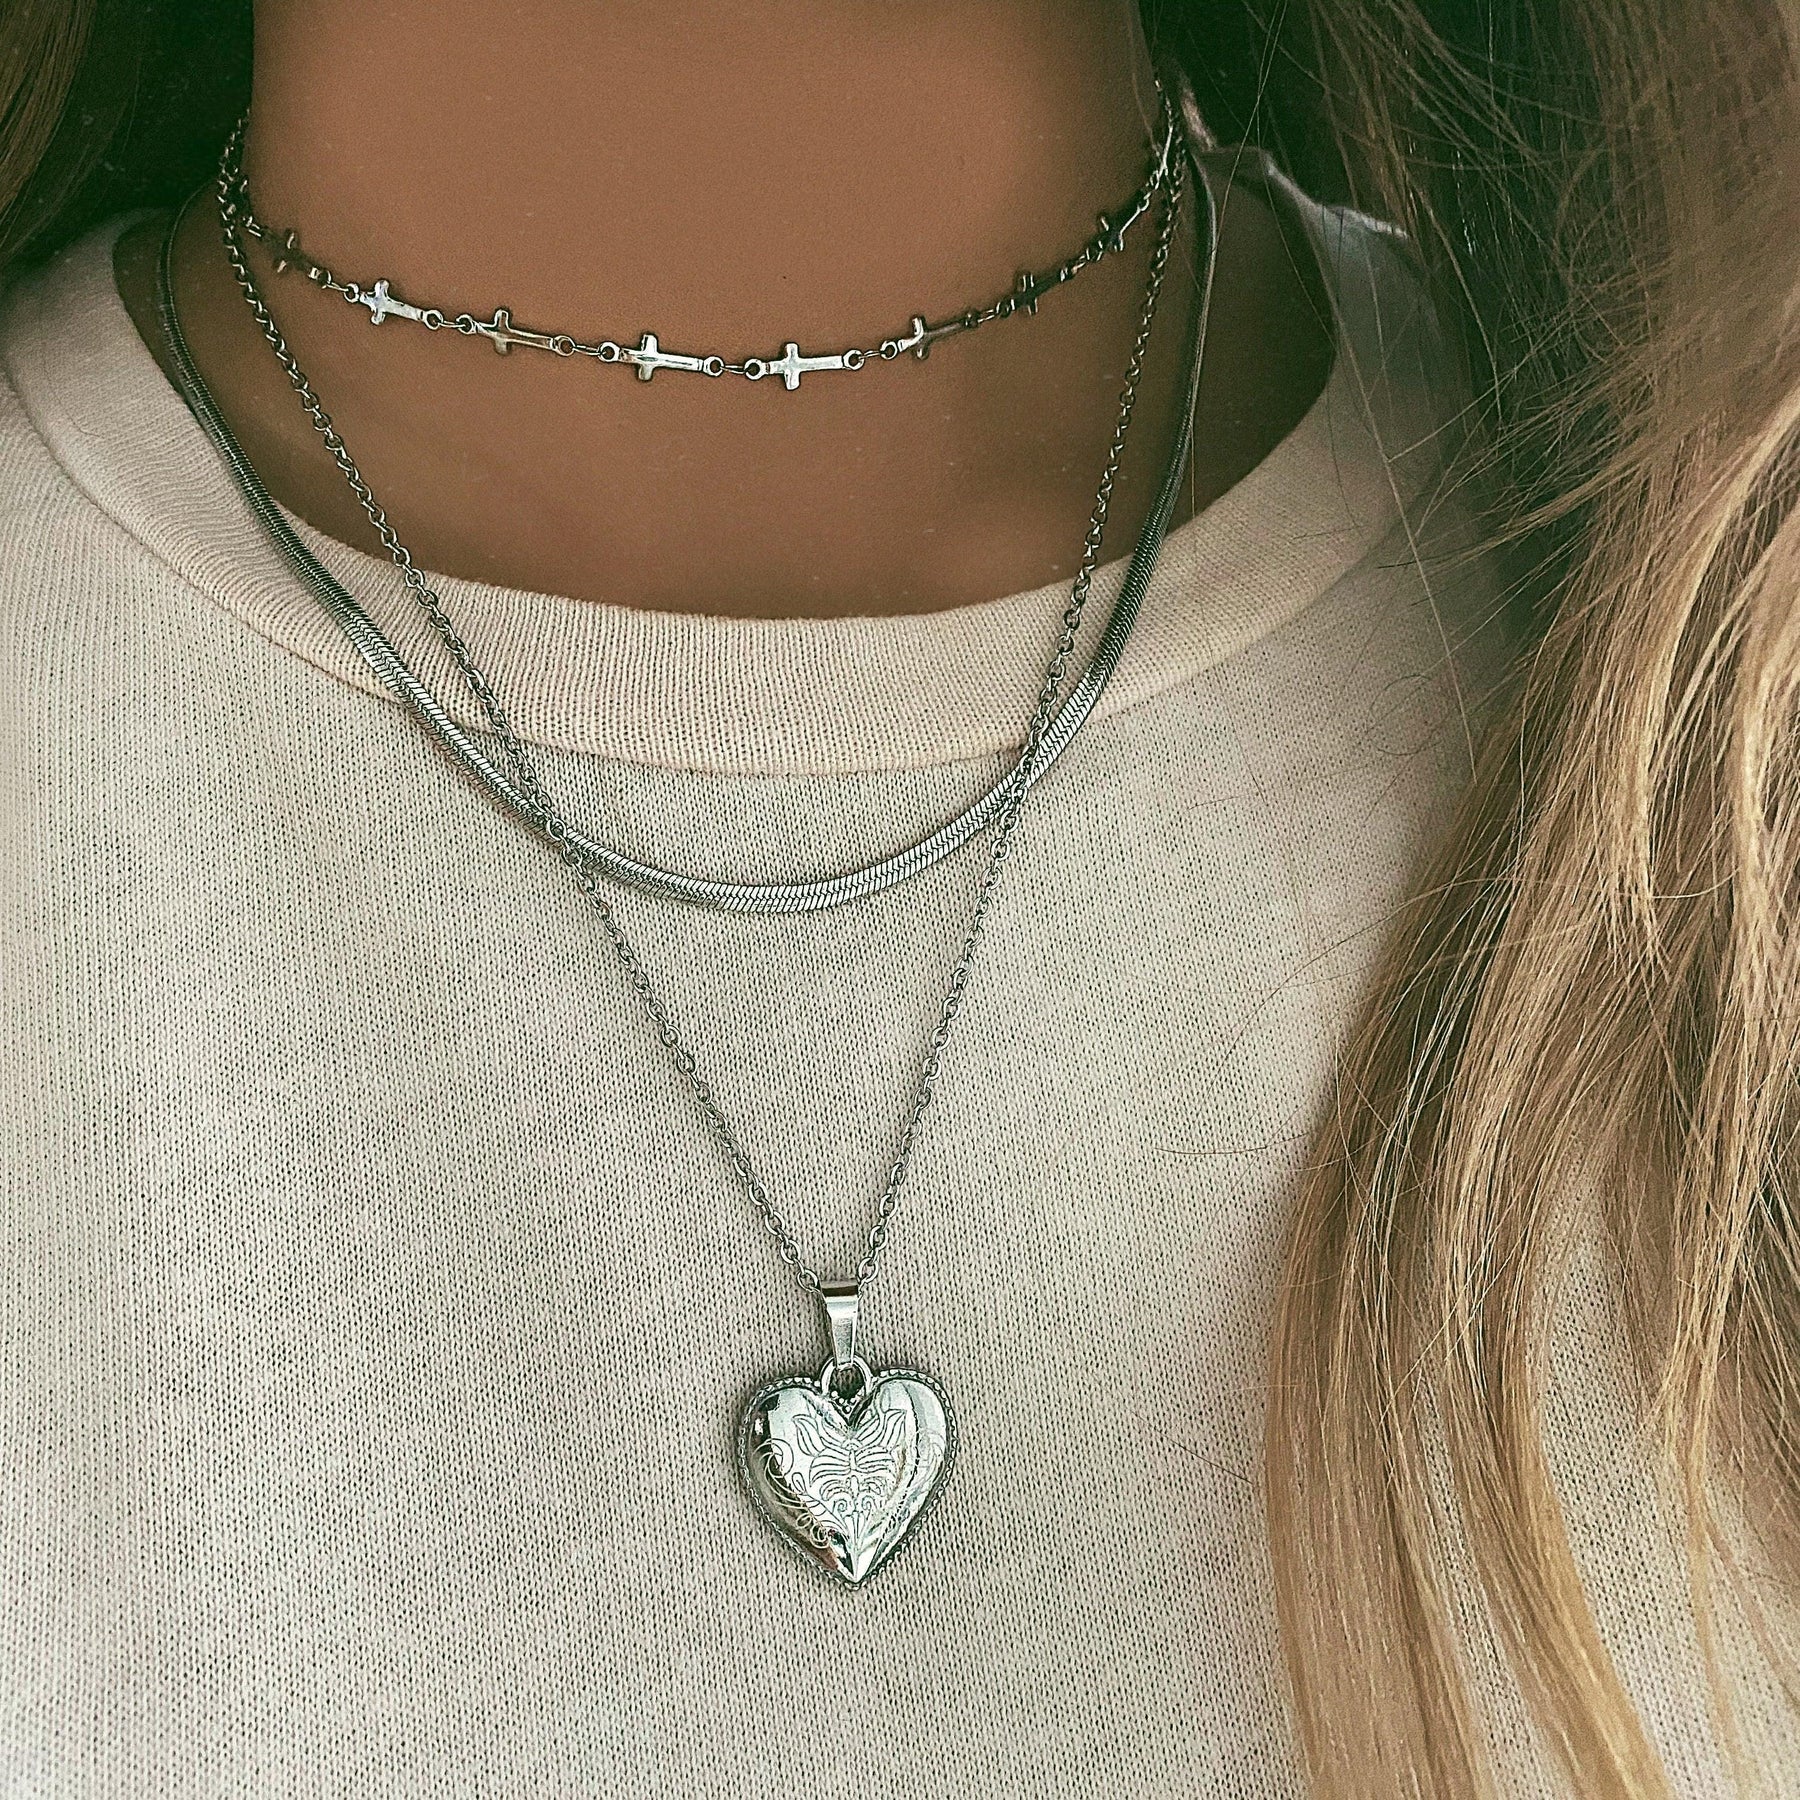 BohoMoon Stainless Steel Engraved Heart Necklace